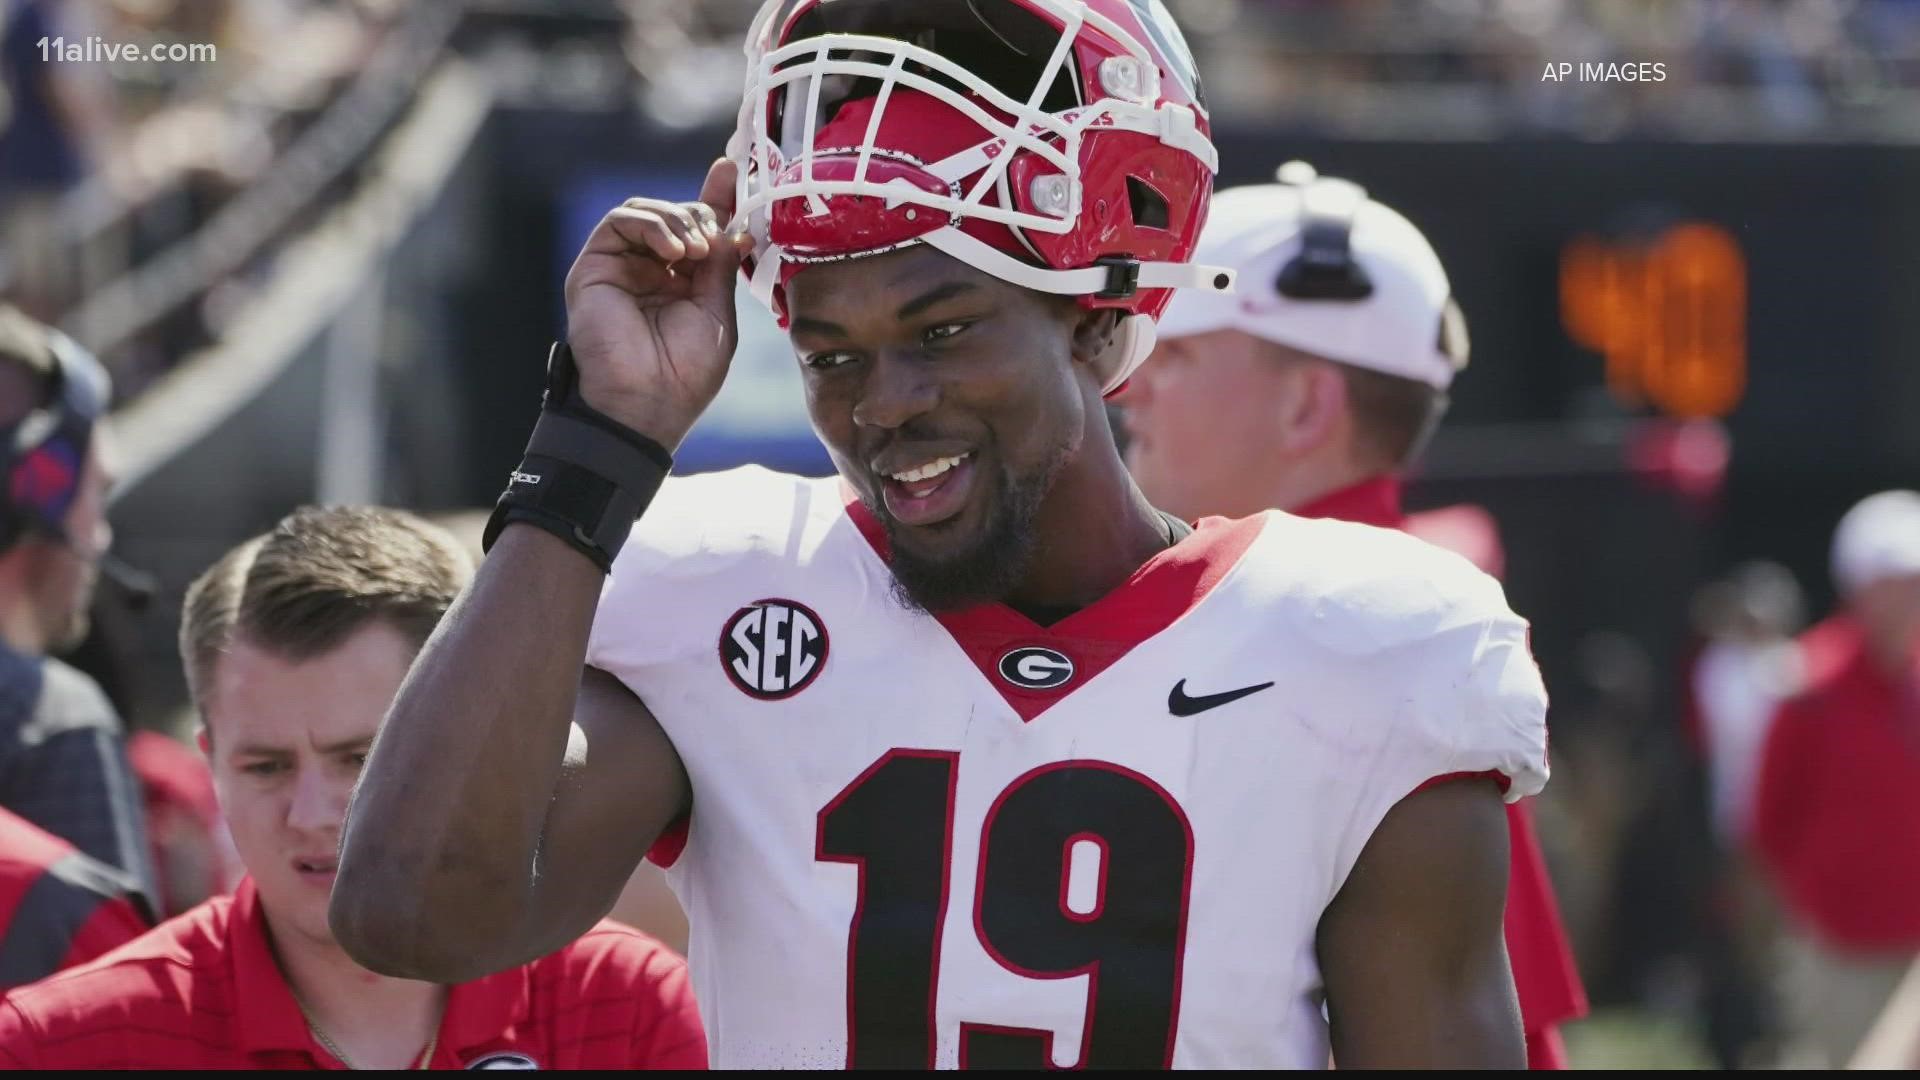 11Alive's UGA insider Radi Nabulsi said Adam Anderson is not expected to play in Saturday's game against Missouri.